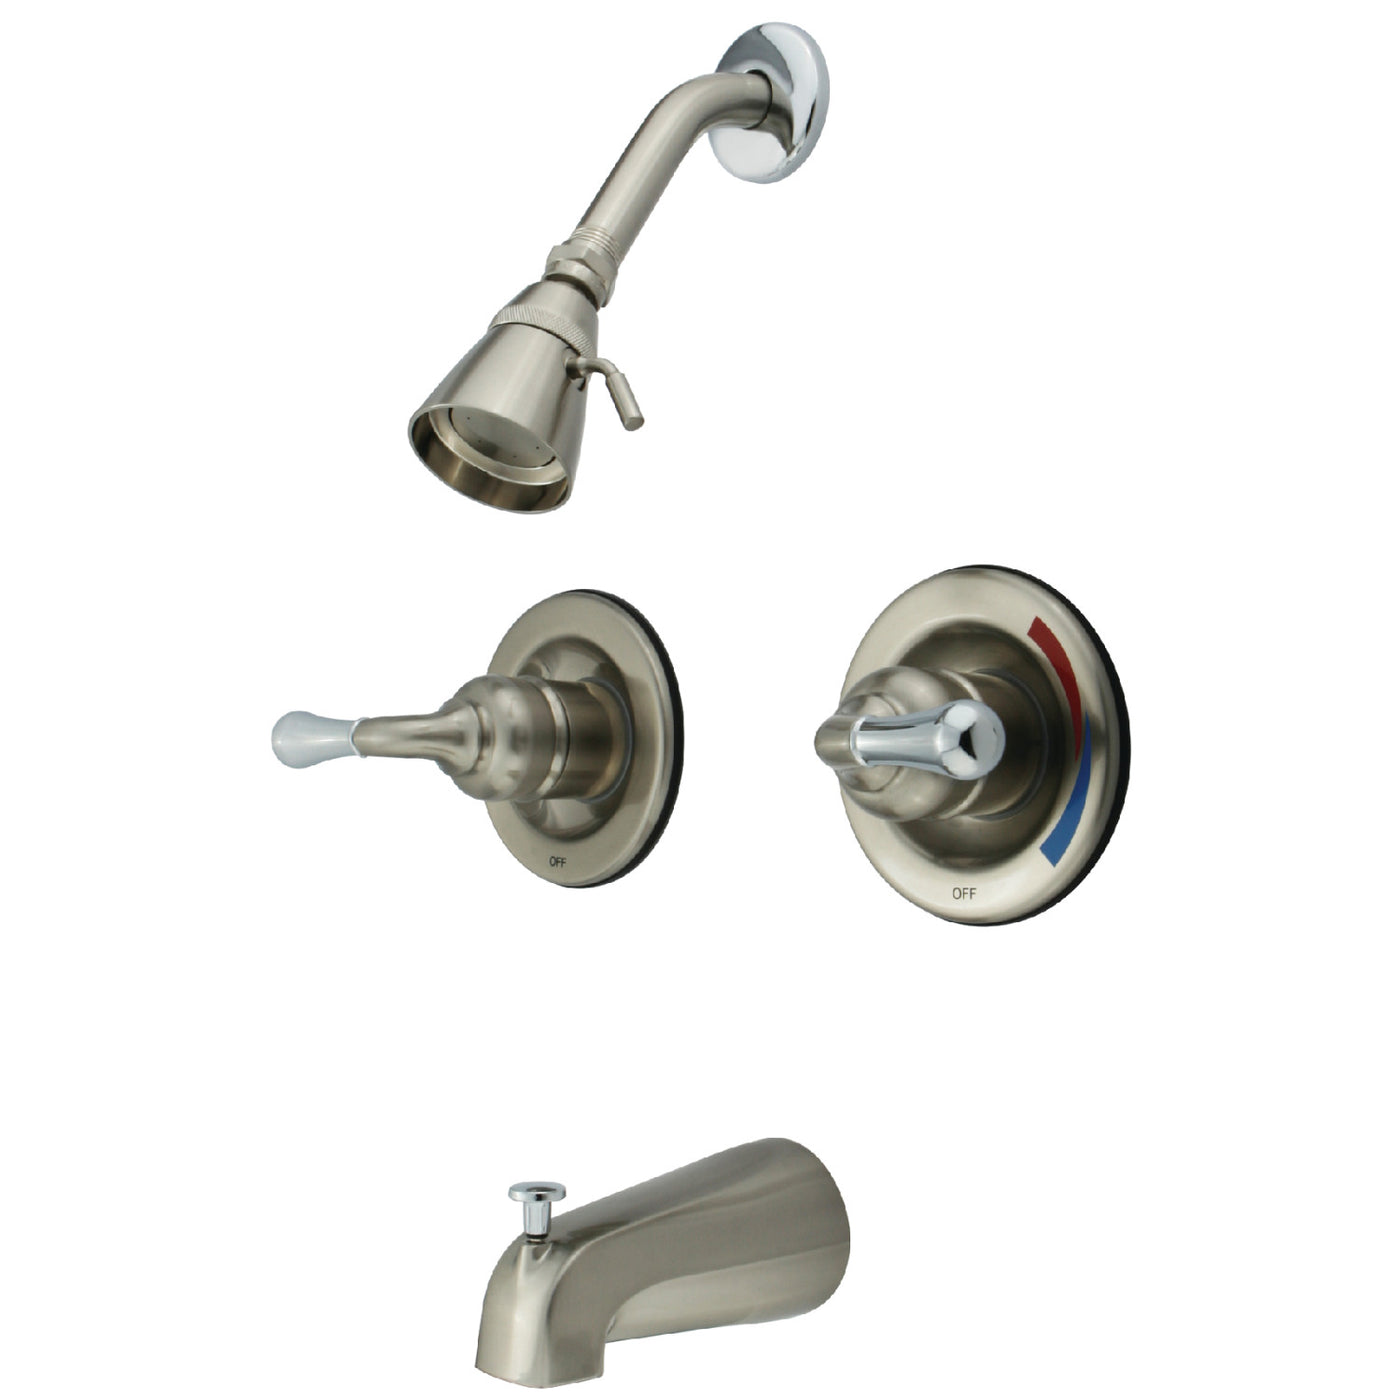 Elements of Design EB677 Two-Handle Pressure Balanced Tub and Shower Faucet, Brushed Nickel/Polished Chrome